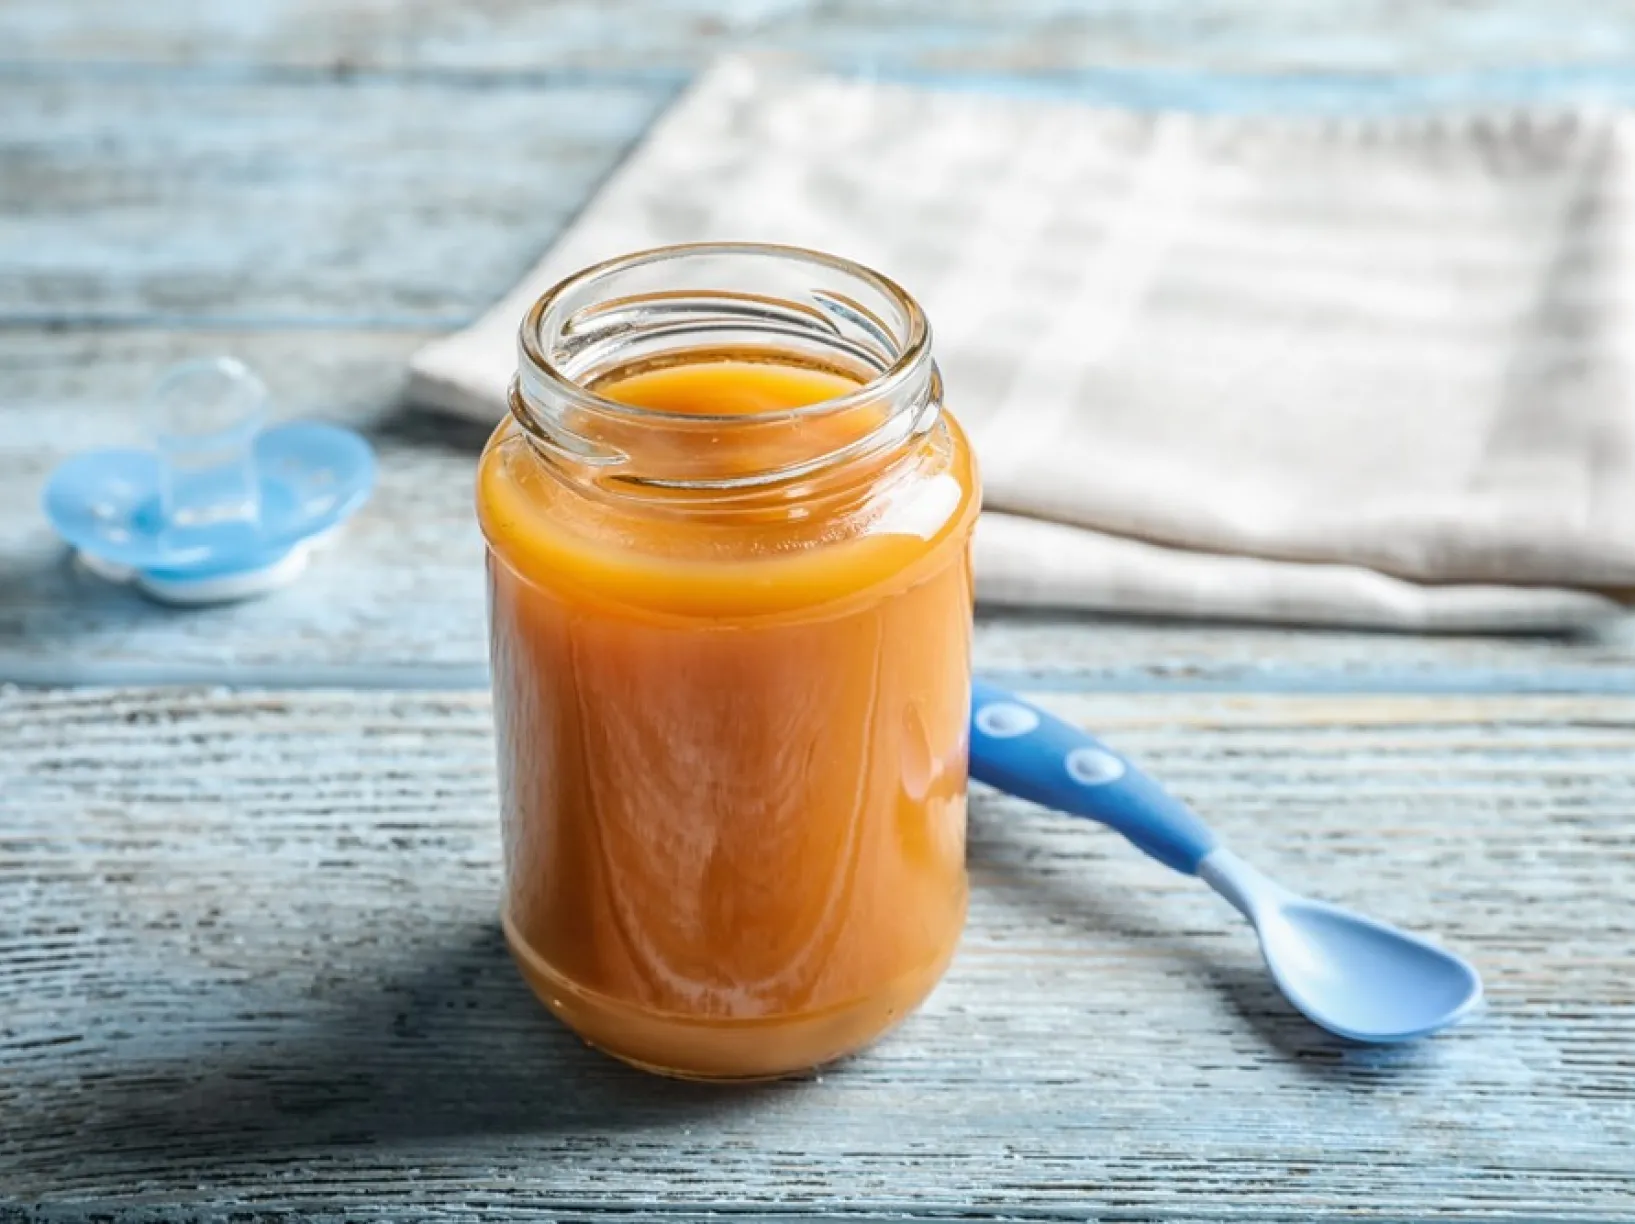 1920_stock-photo-jar-with-healthy-baby-food-on-wooden-table-768833842